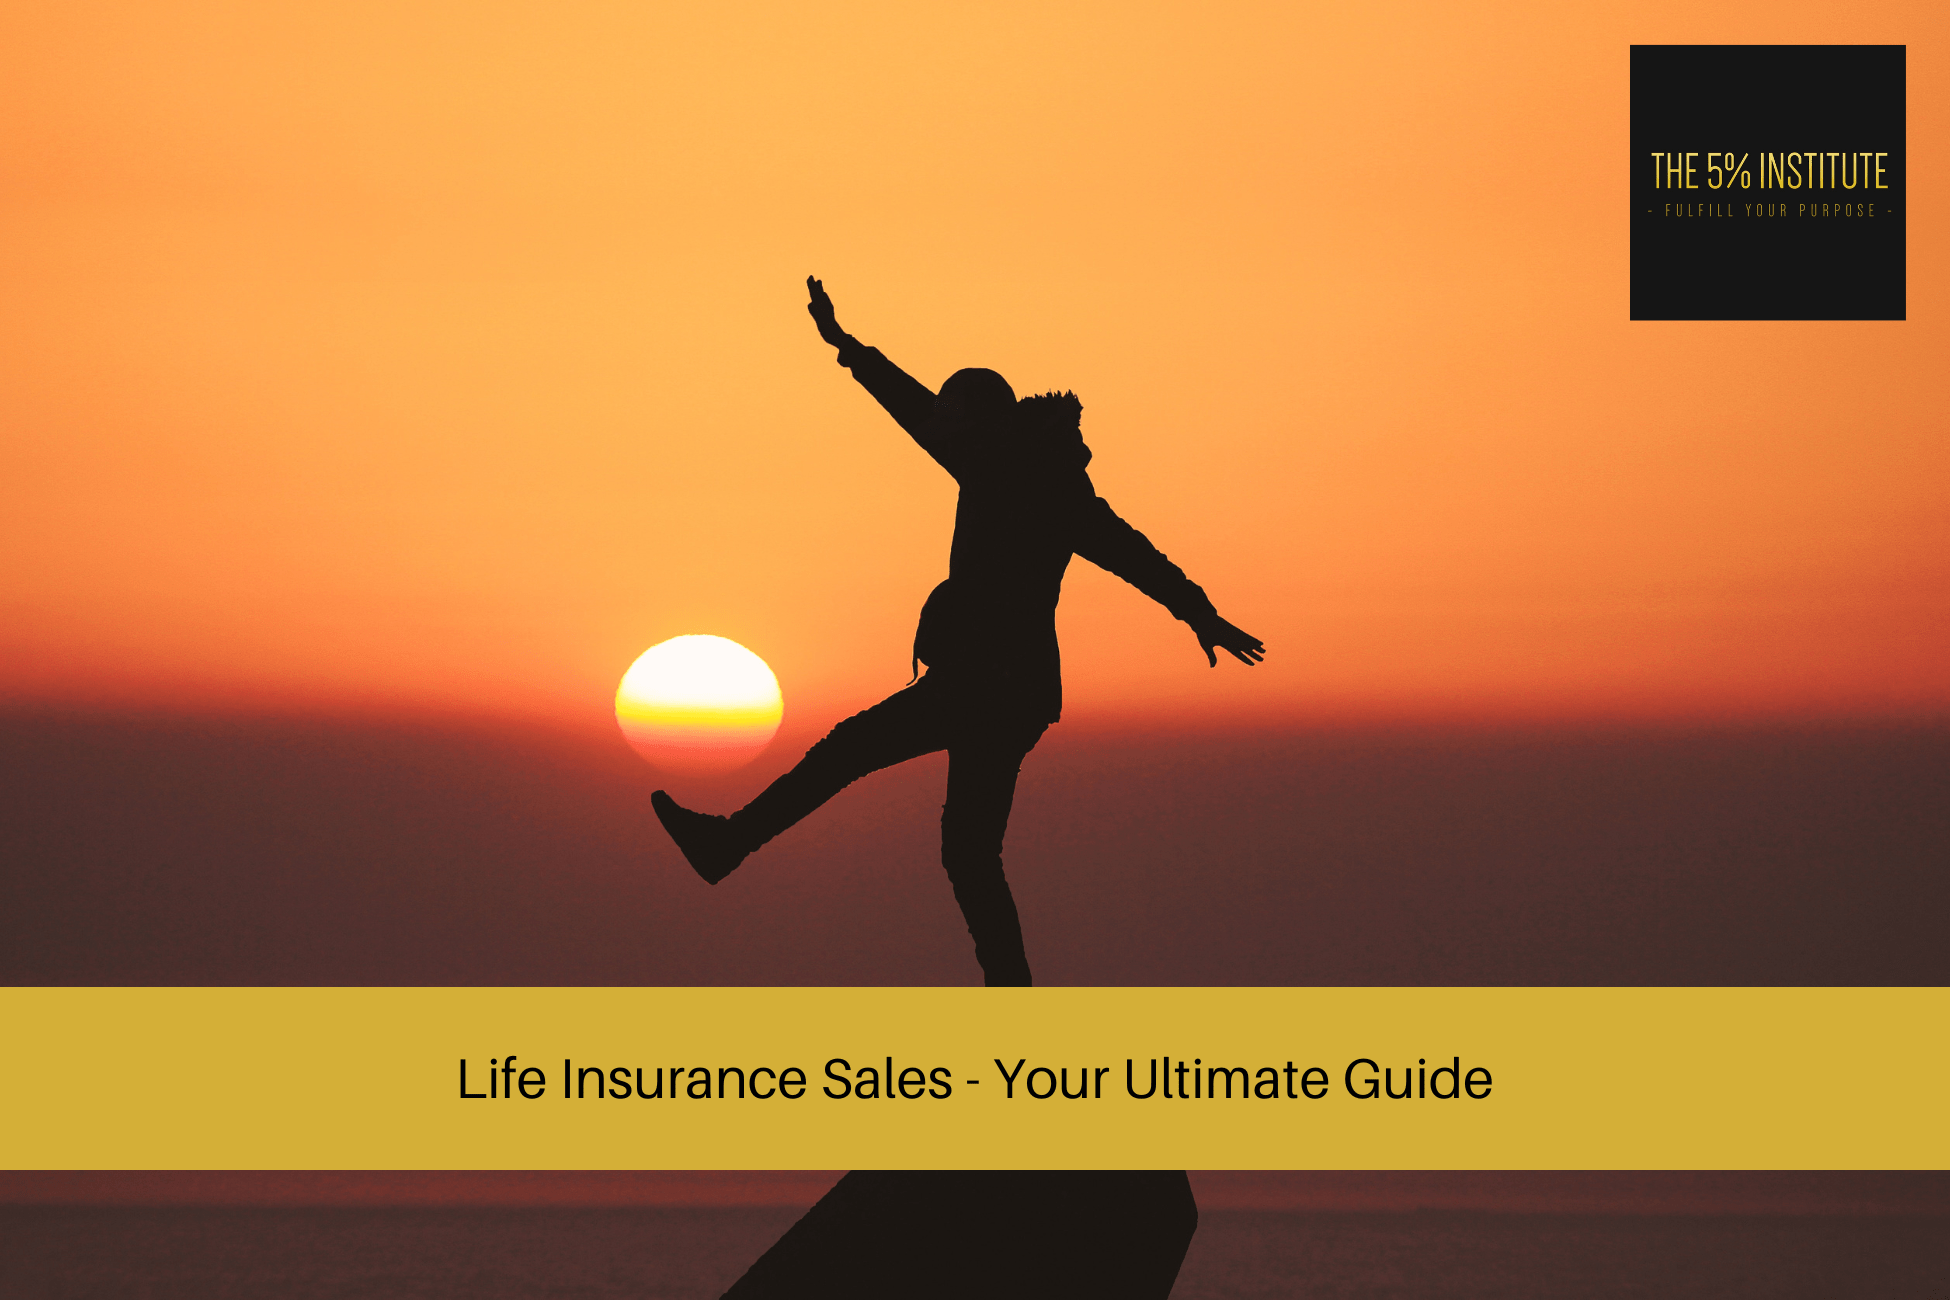 Life Insurance Sales - Your Ultimate Guide